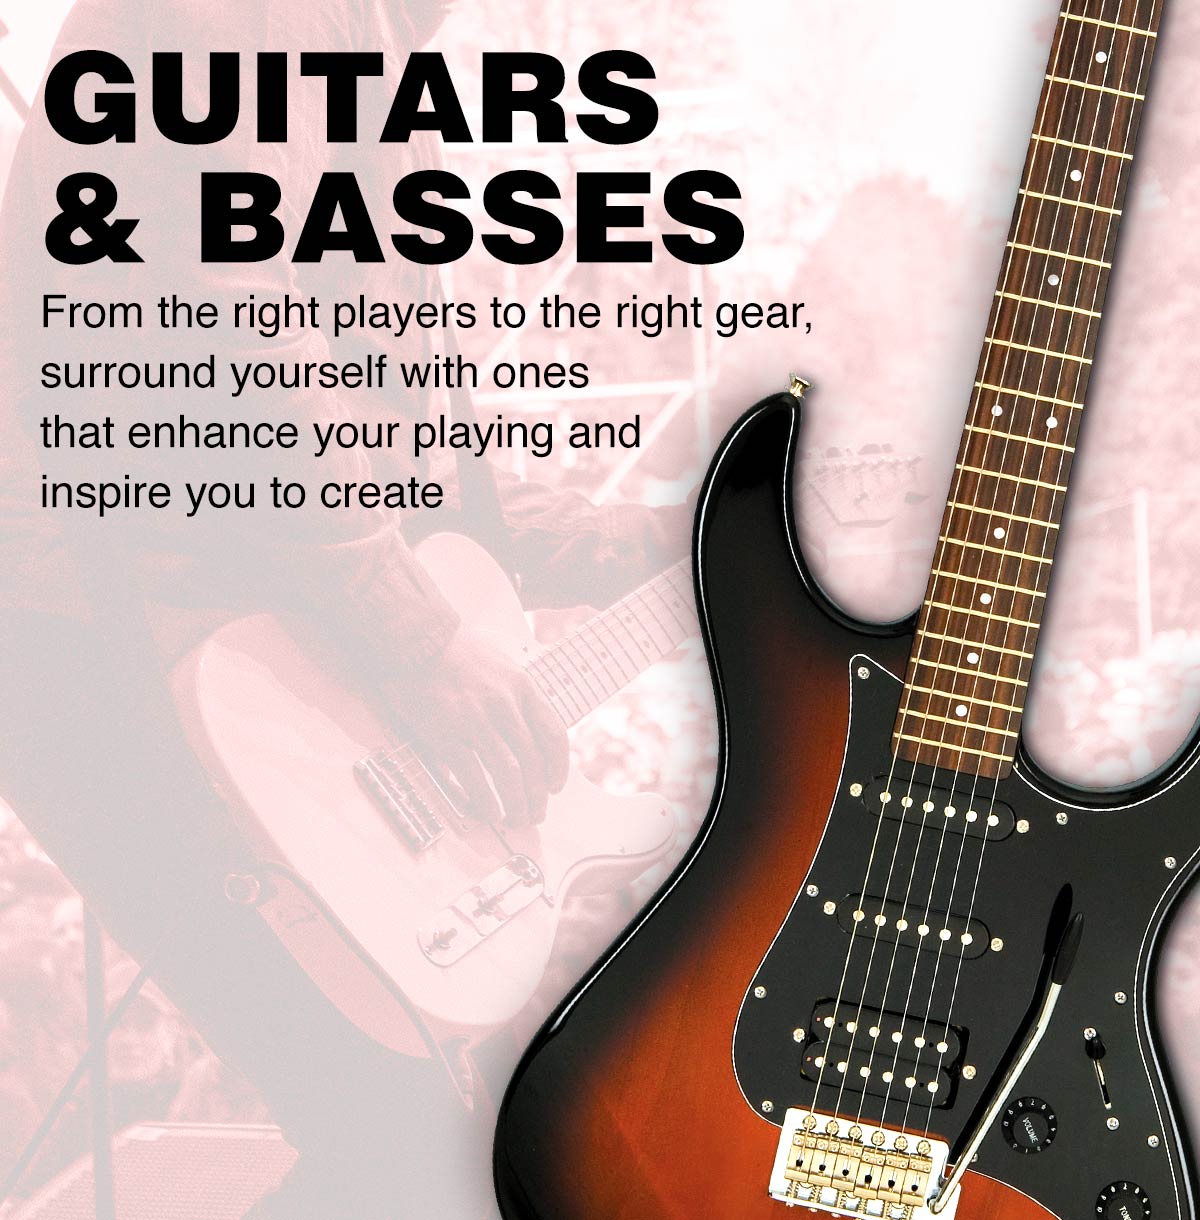 Guitars & Basses. From the right players to the right gear, surround yourself with ones that enhance your playing and inpire you to create